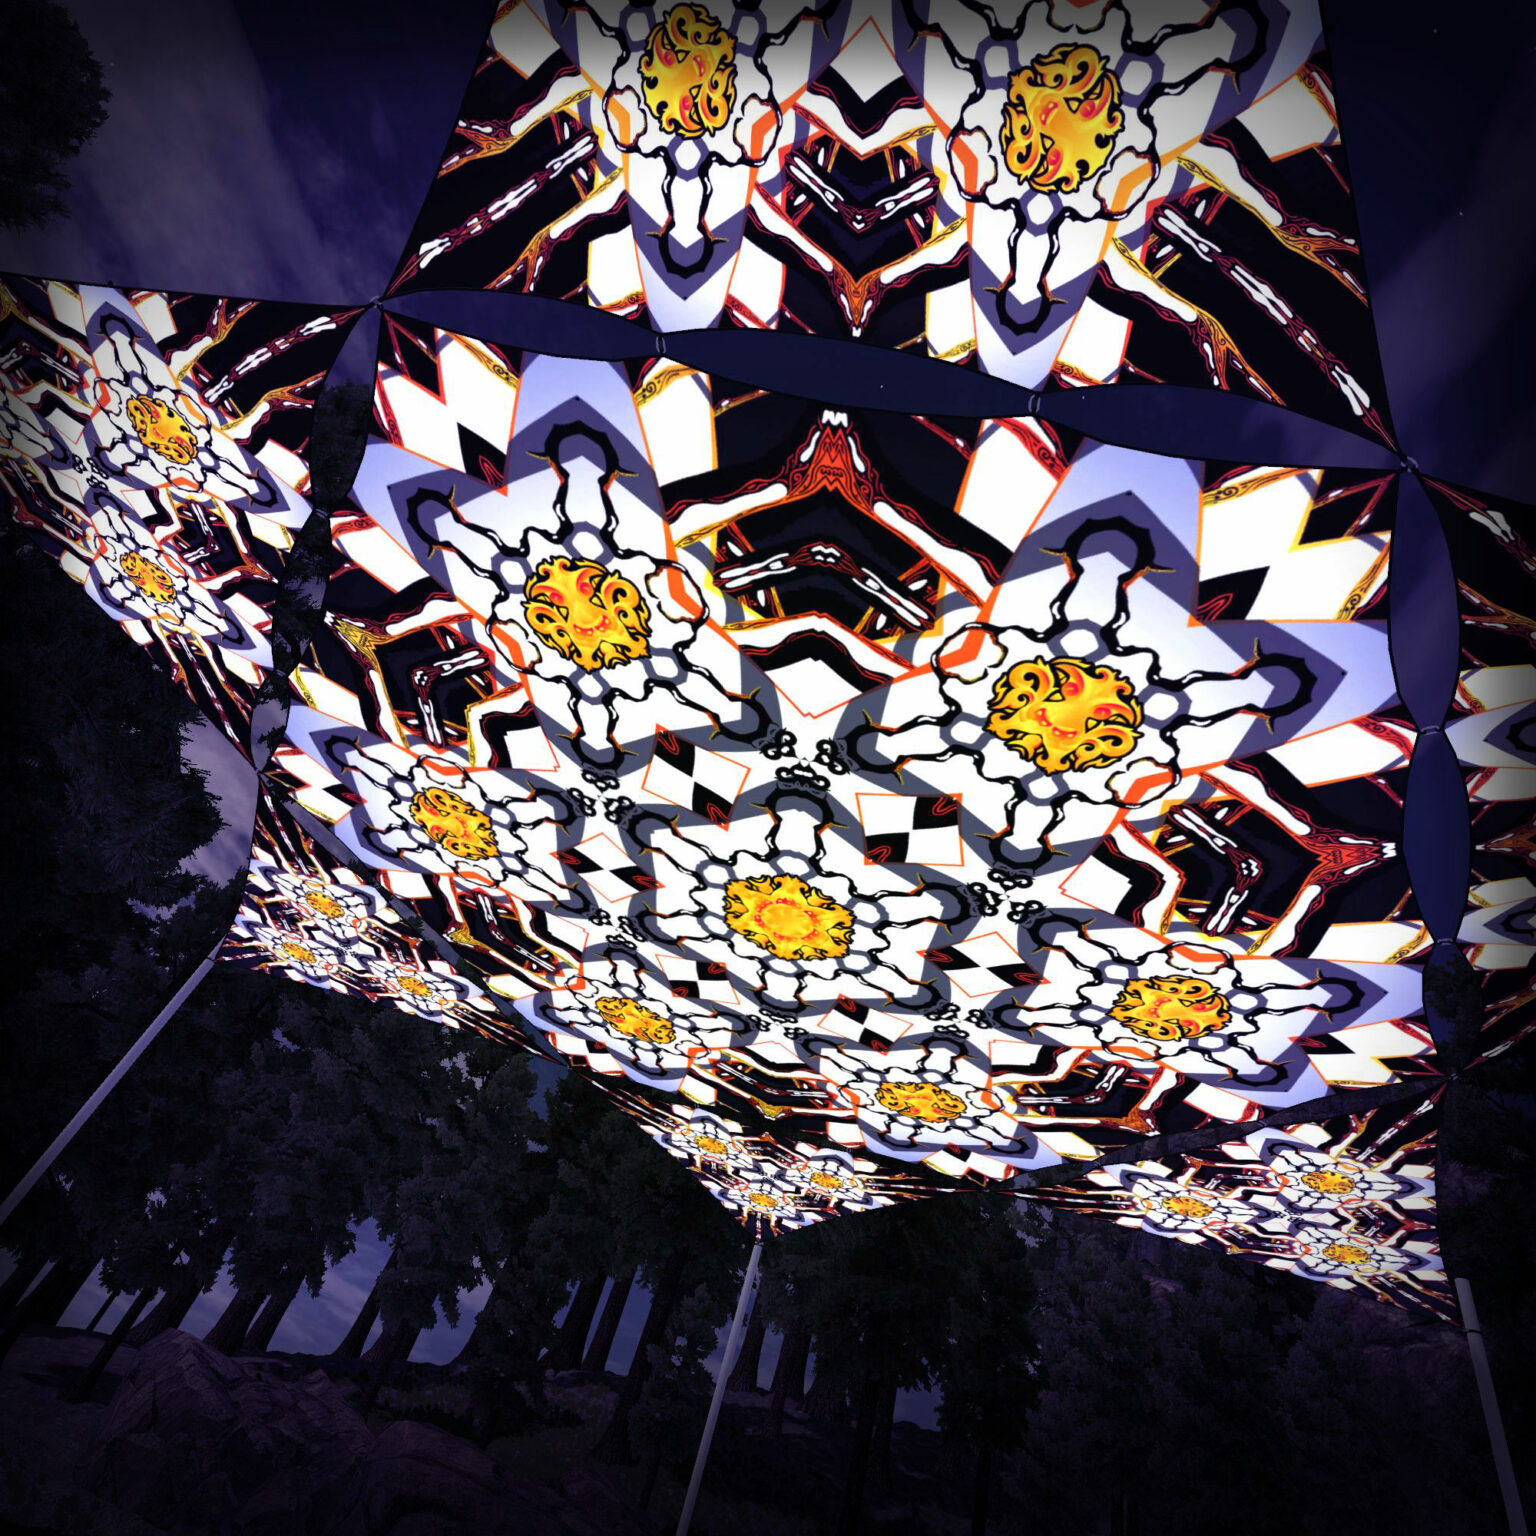 WT-HX03 Hexagon and 6 Triangles WT-TR03 - 3D-Preview - Forest - Psychedelic UV-Reactive Canopy – Ceiling Decoration